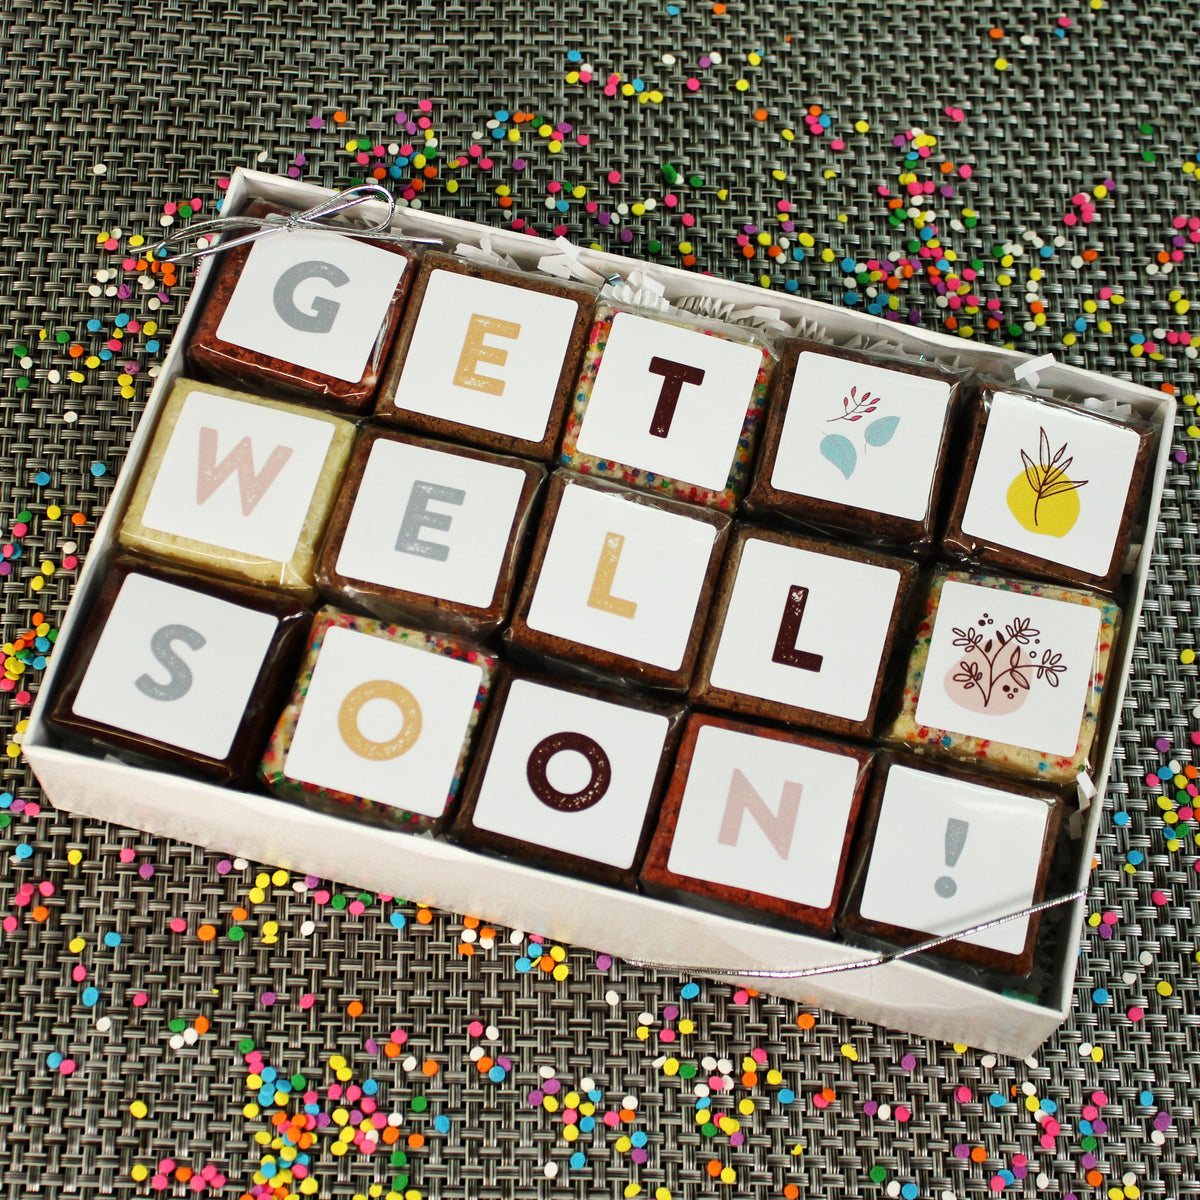 Get Well Gift of Brownies. Get Well BrownieGram-Small Batch Brownies